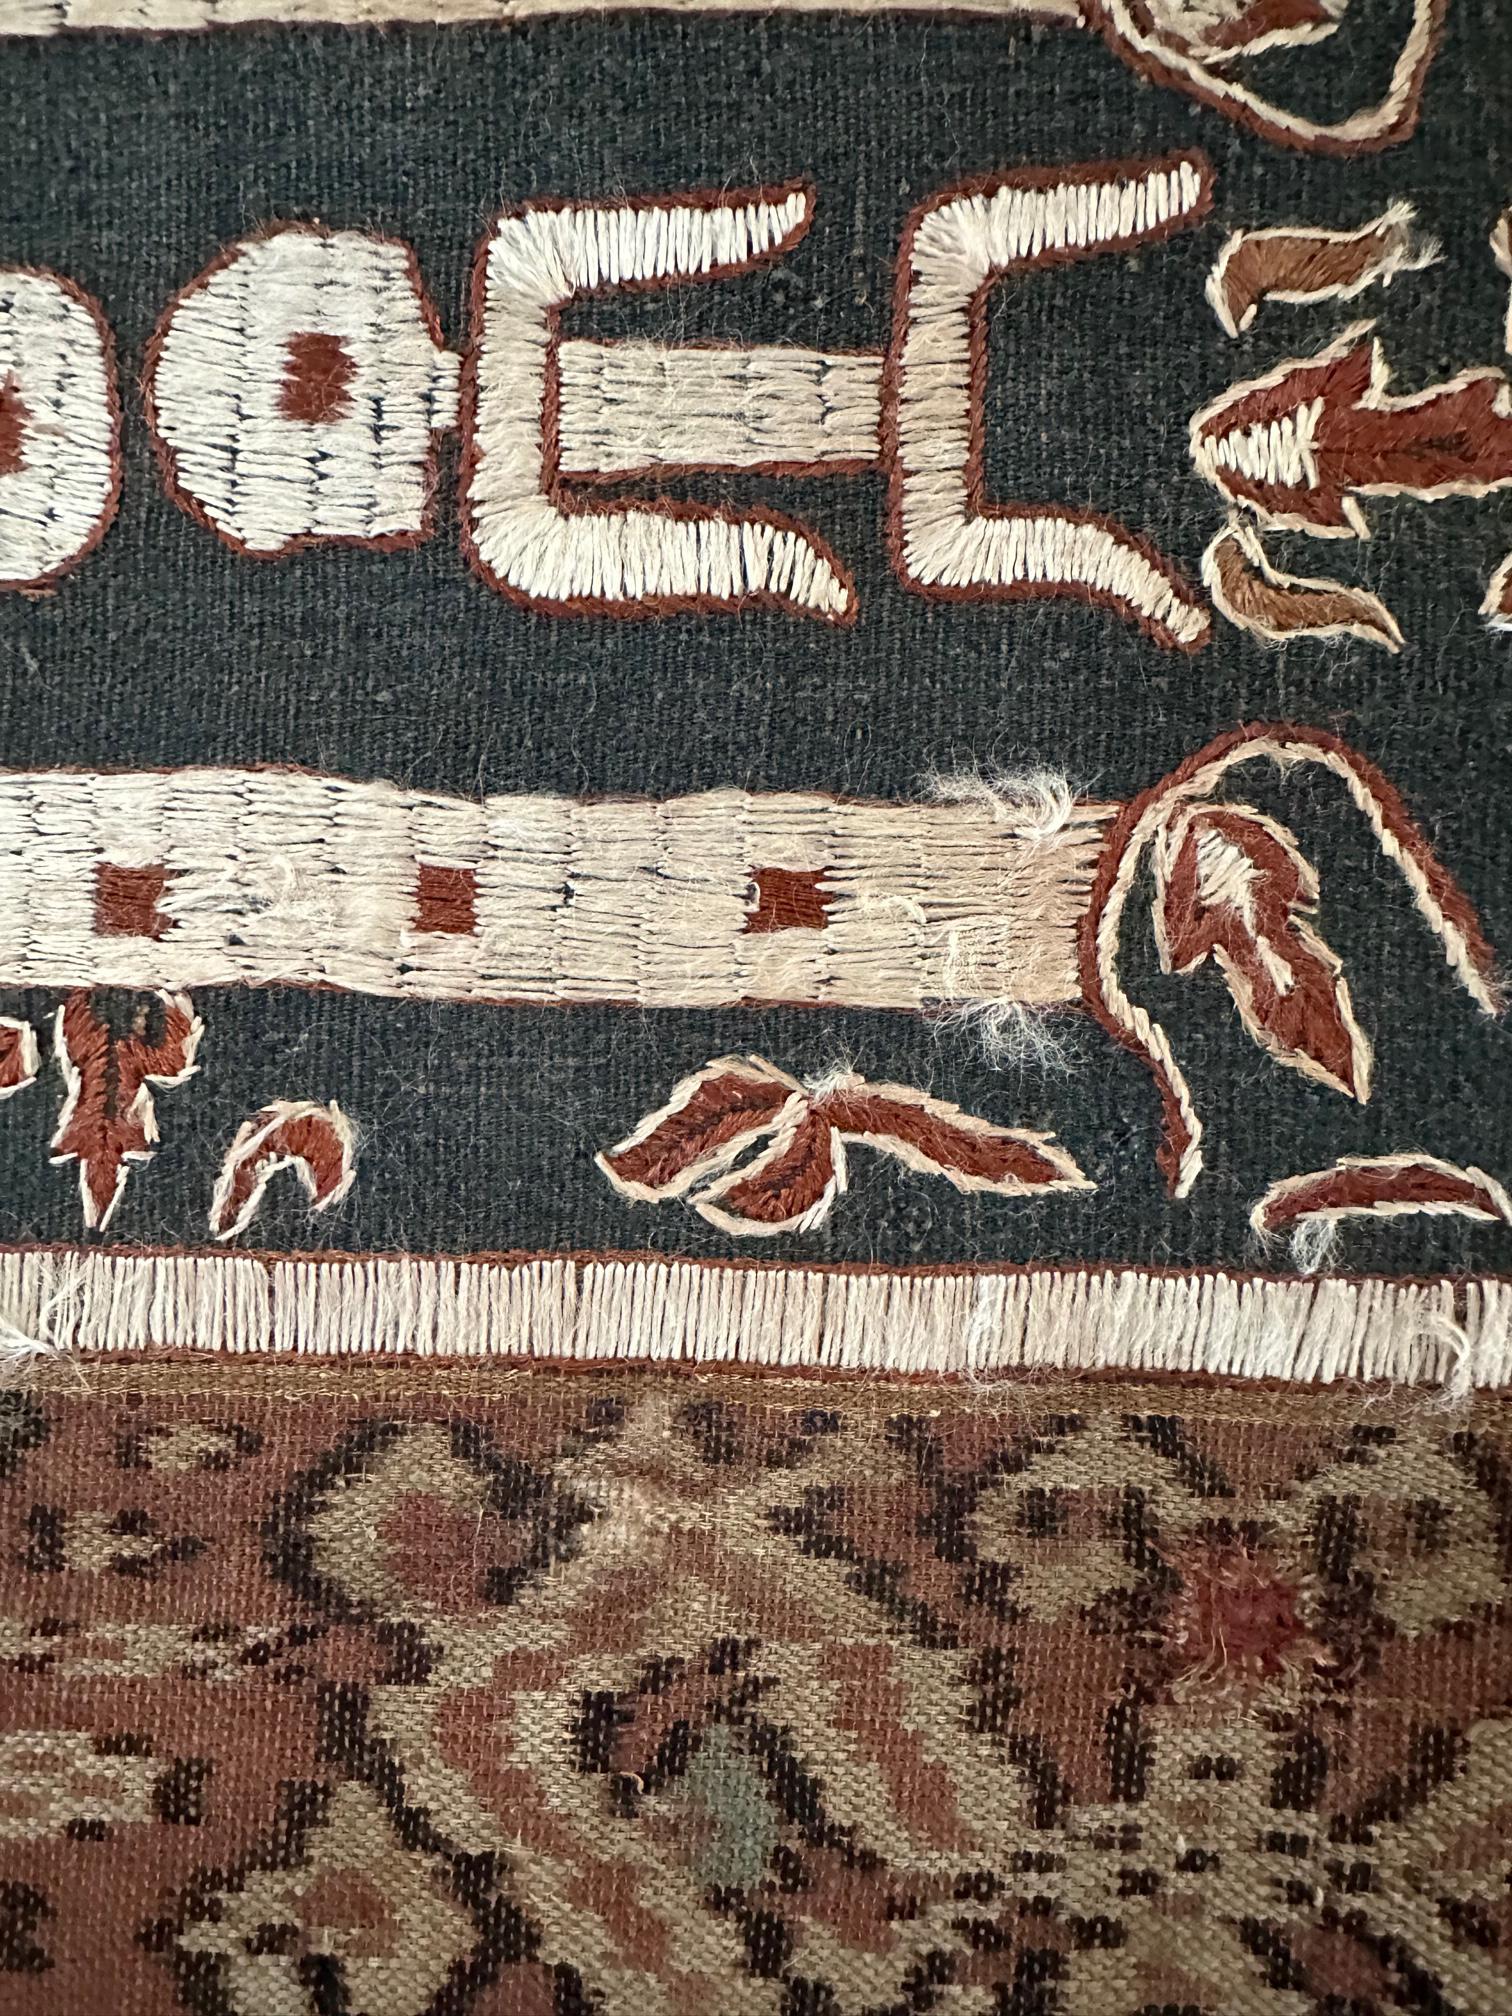 Ikat and Embroidery Textile Panel from Sumatra Indonesia For Sale 6